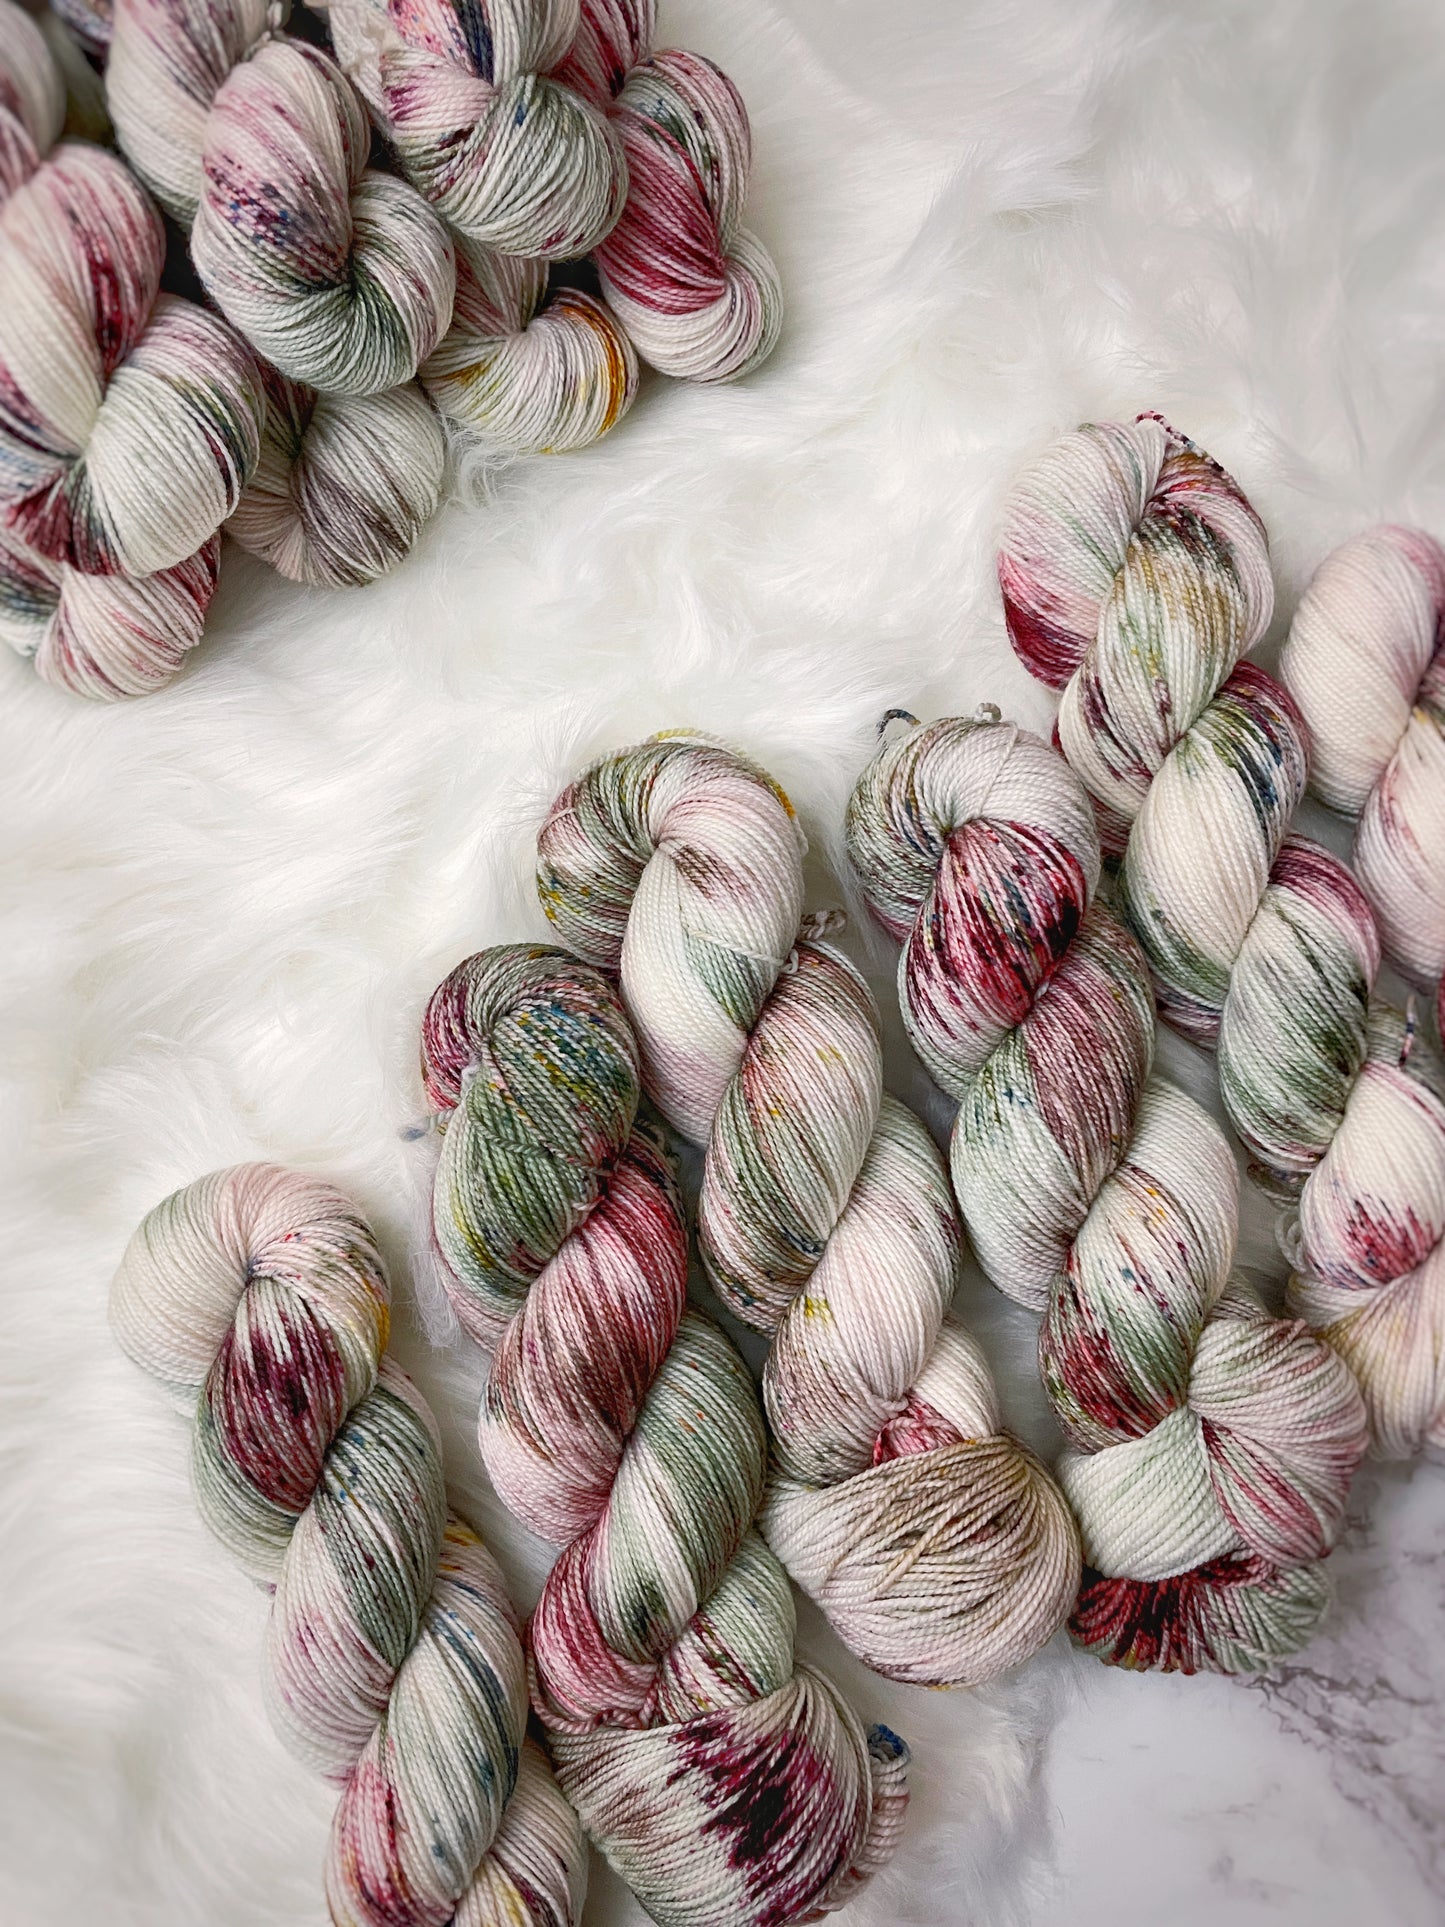 Frosted Rose | 2022 Advent Skein | PREORDER